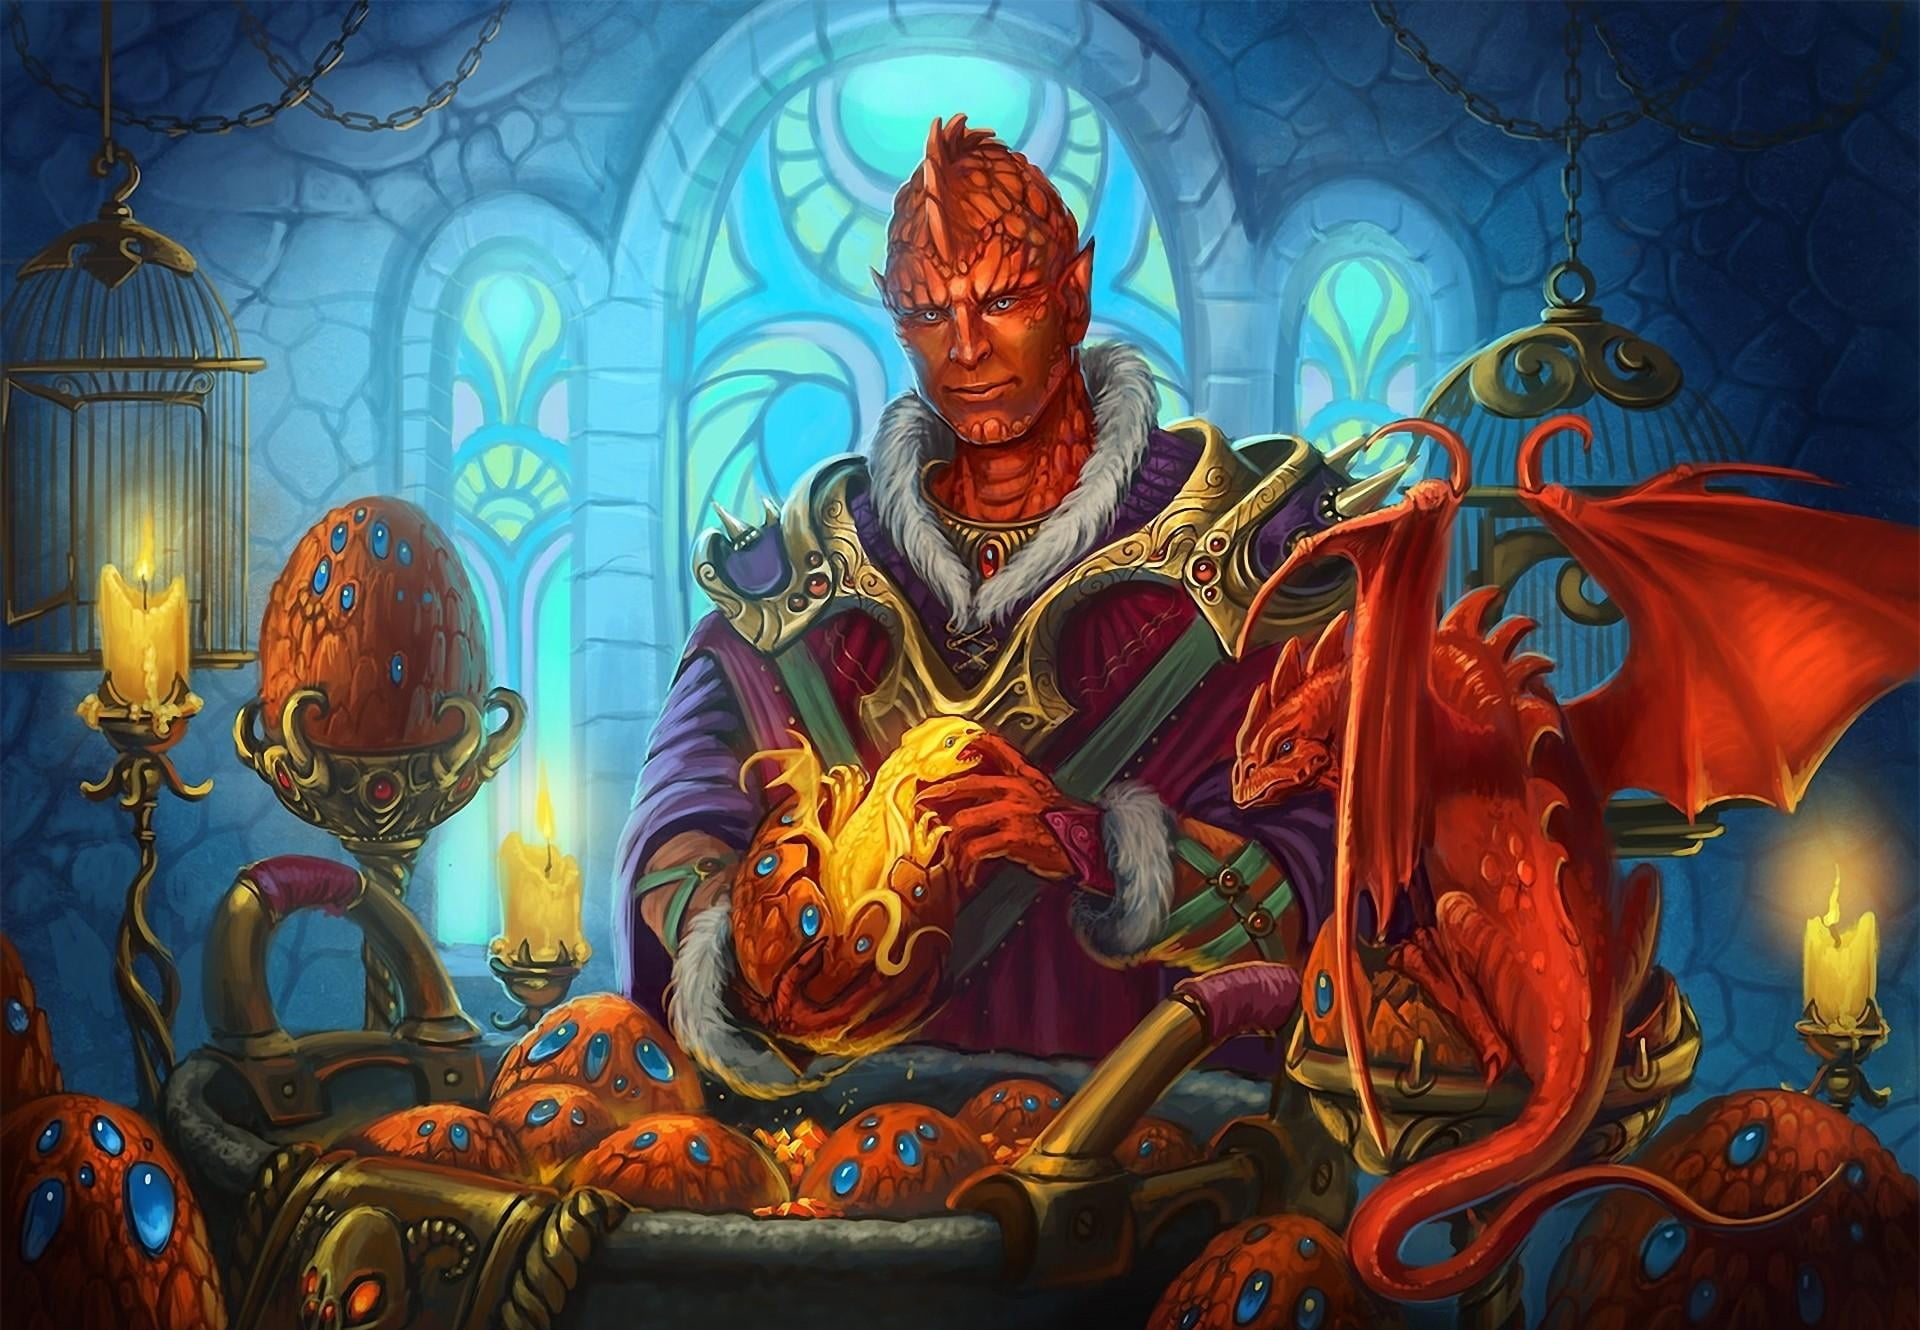 red dragon and humanoid figure art, egg, cells, castle, candles